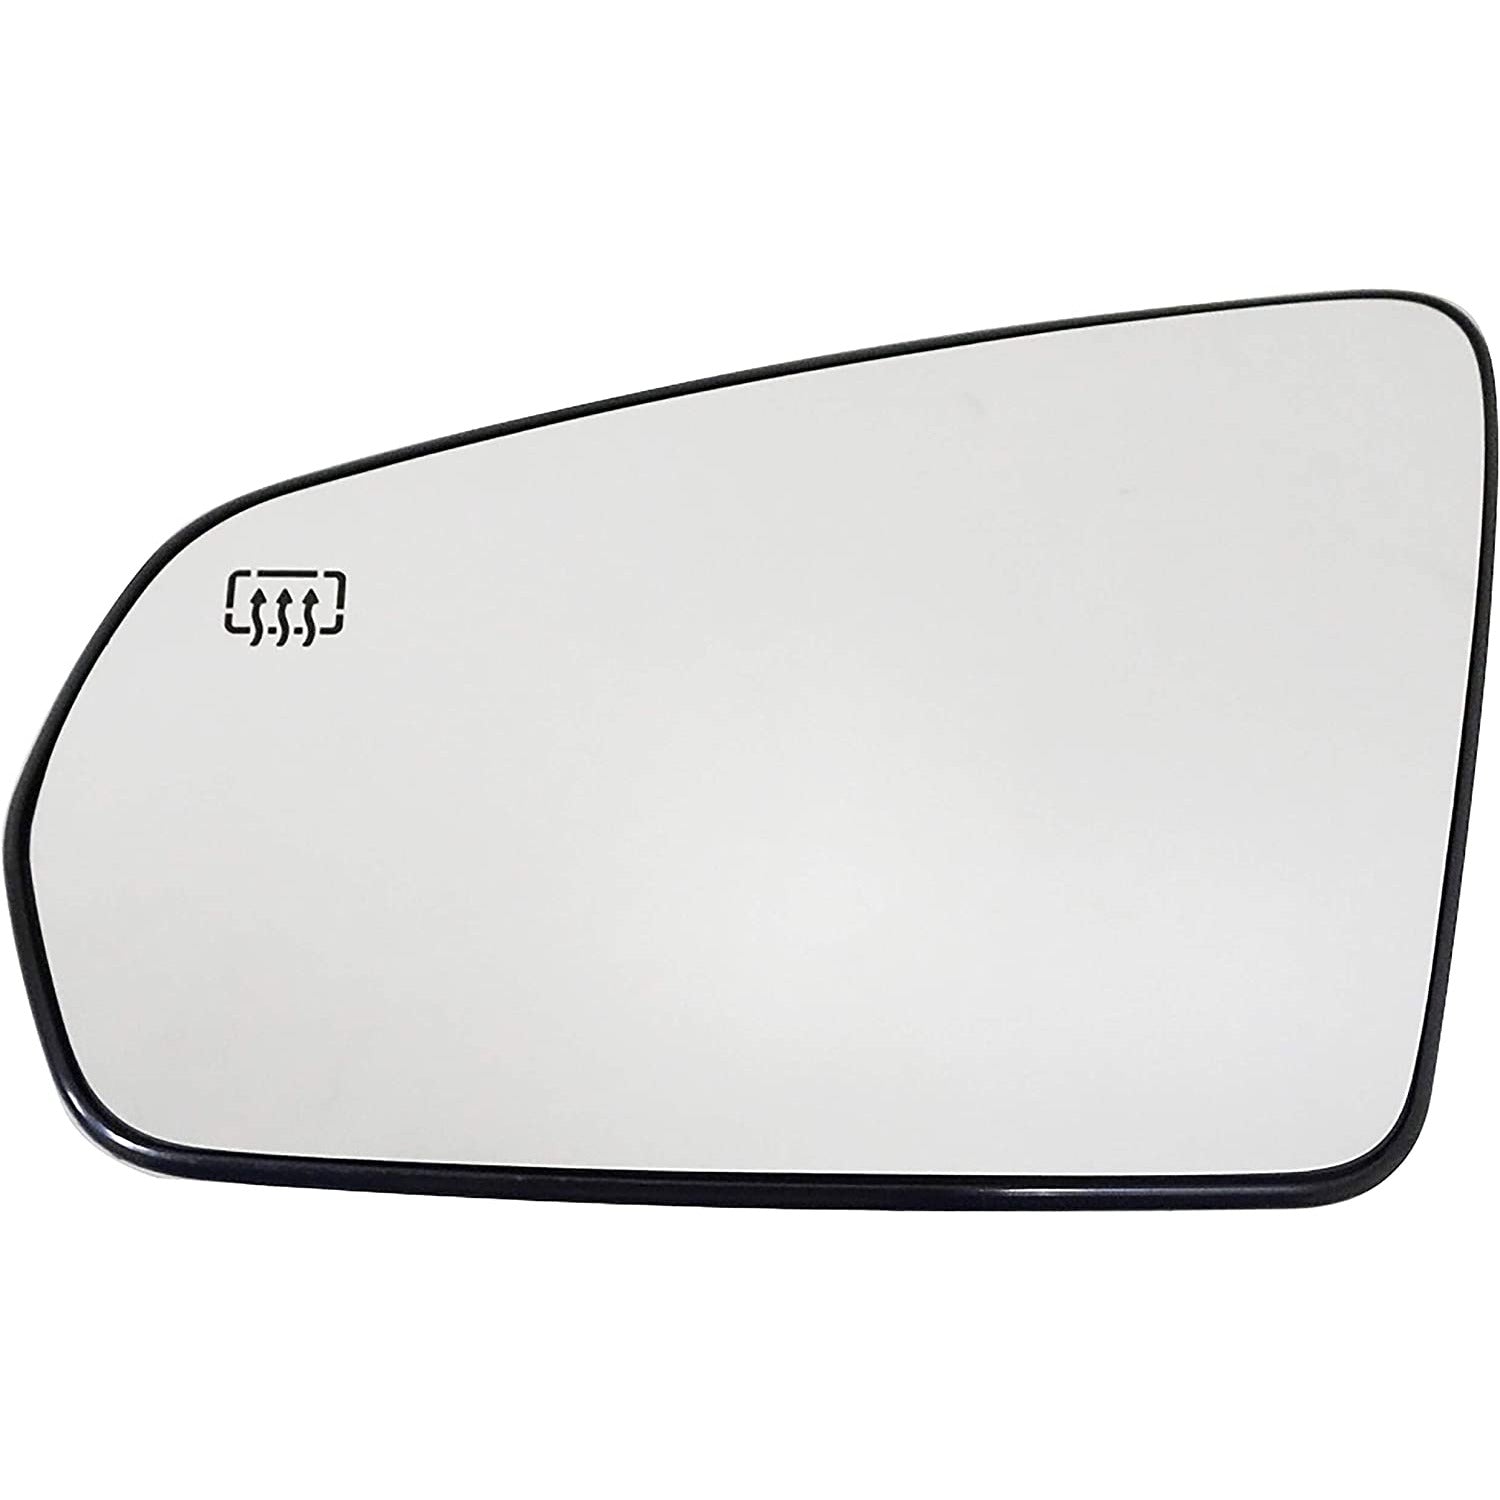 MTM 56903 Dorman Replacement Plastic-Backed Mirror Glass (Left, Heated, 07-14 Chrysler Cars)